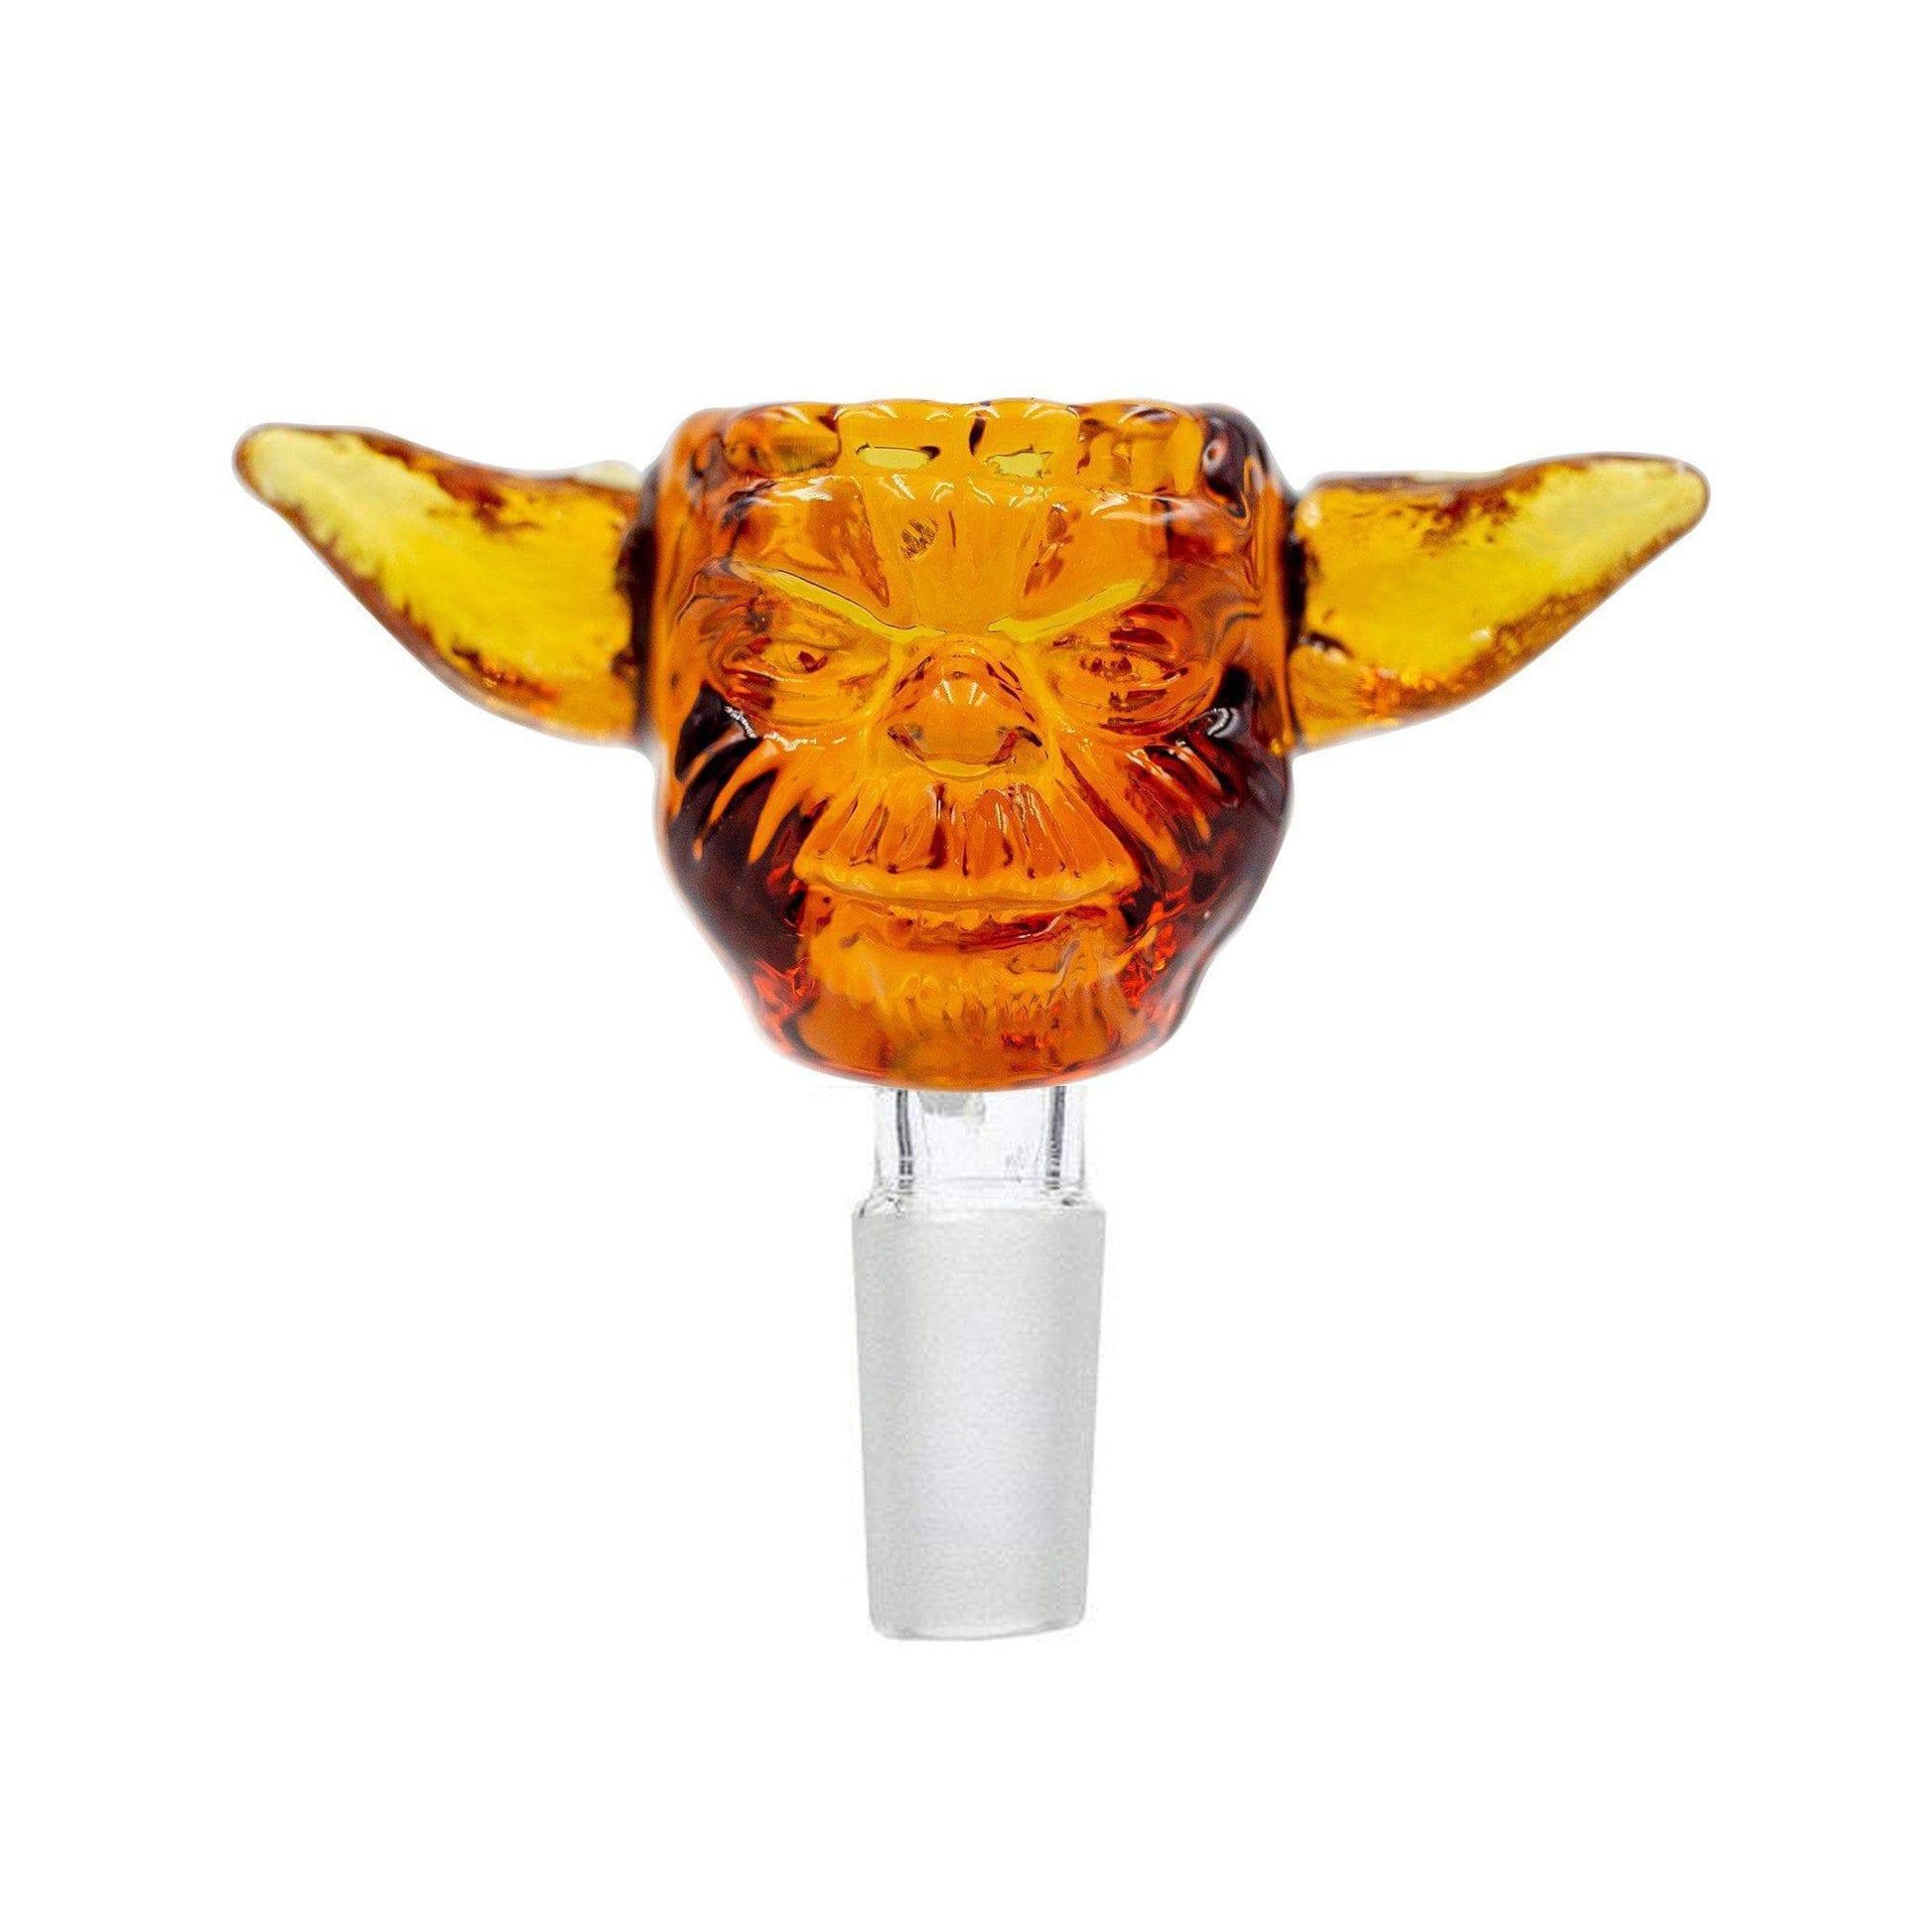 14mm clear glass bowl Star Wars male joint bong smoking accessory bowl sculpted face Jedi master Yoda big ears finger grips